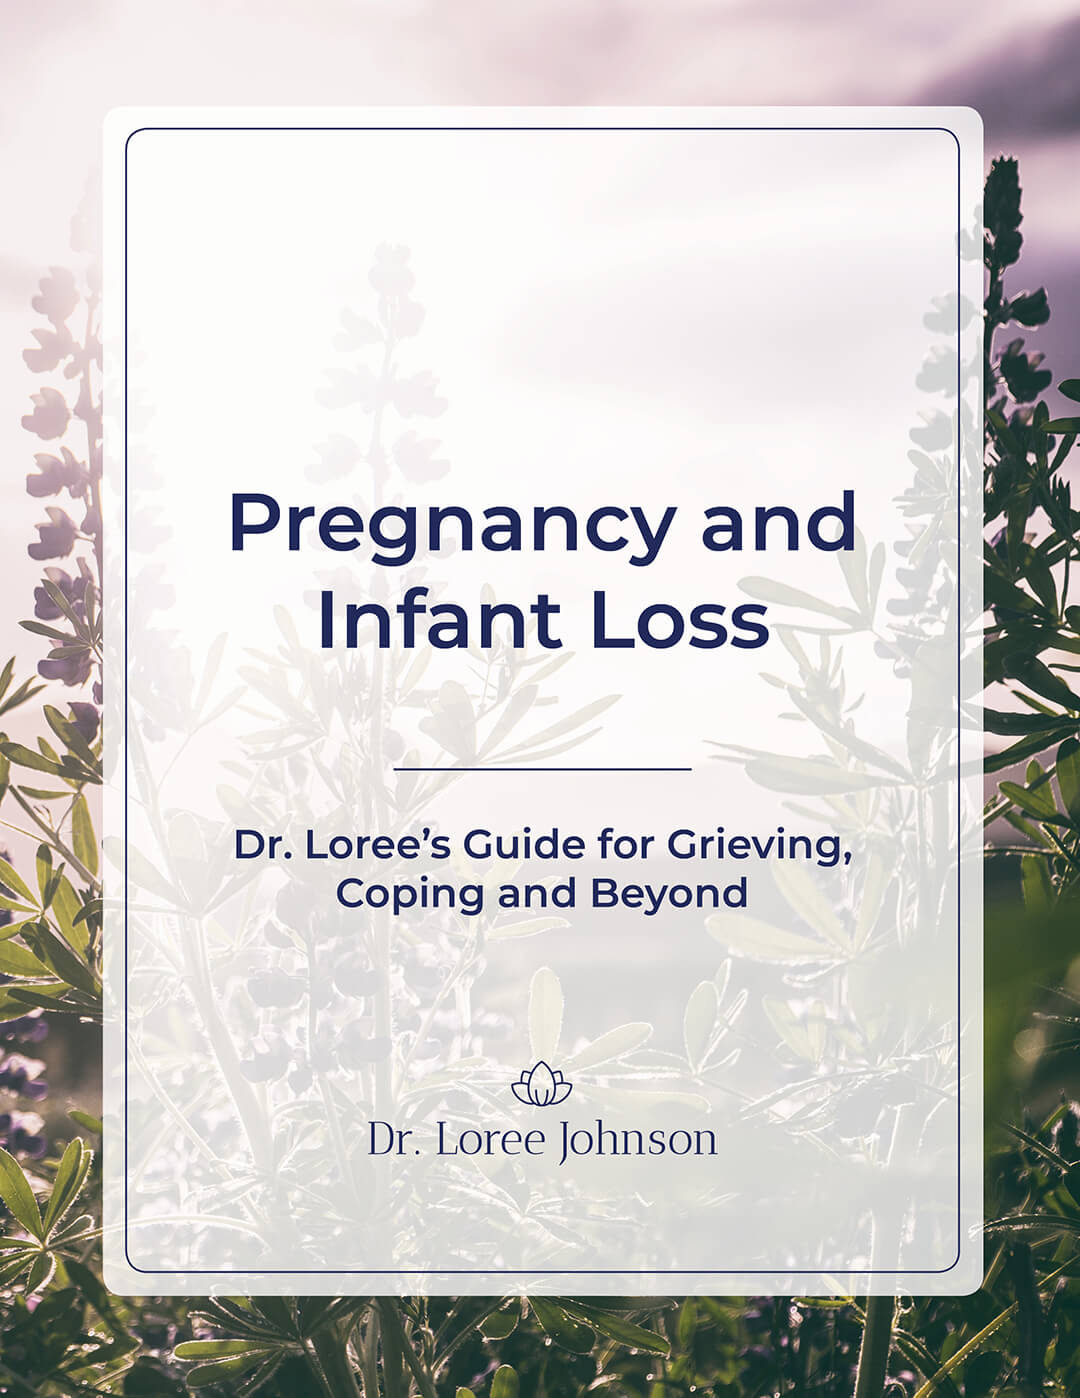 Pregnancy and infant loss - Dr. Loree Guide for Grieving, Coping, and Beyond